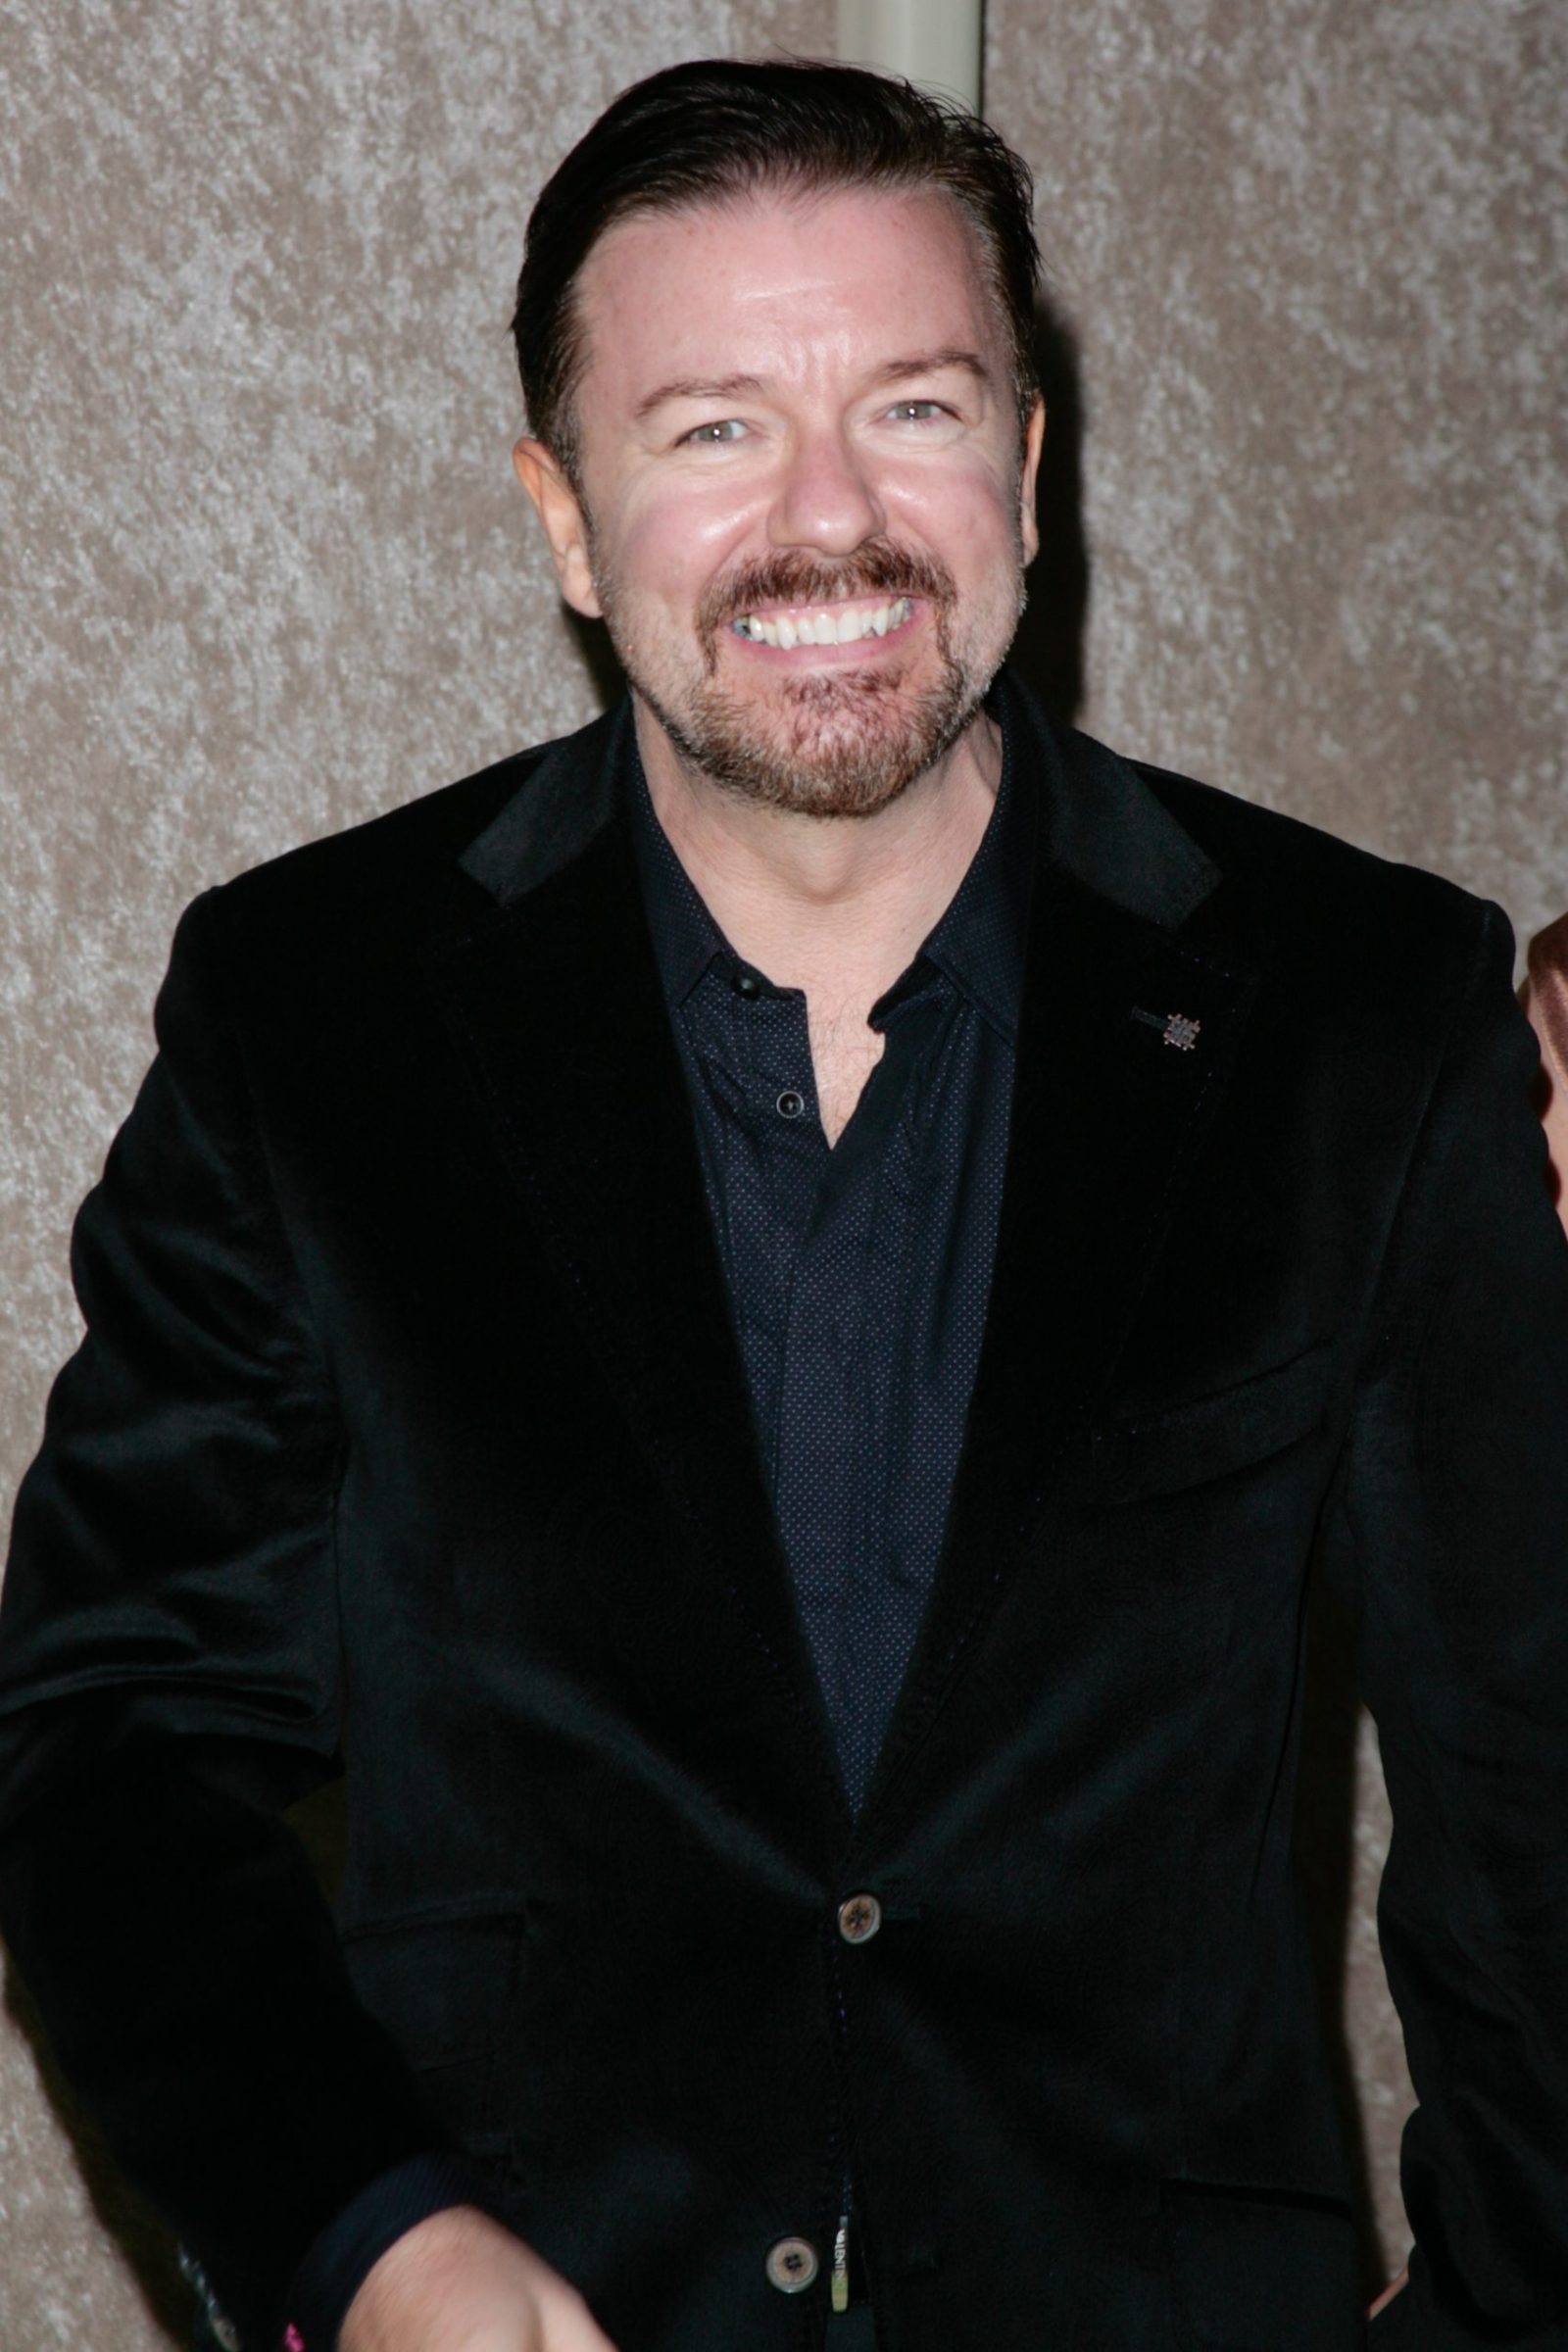 Ricky gervais smiling in a black suit